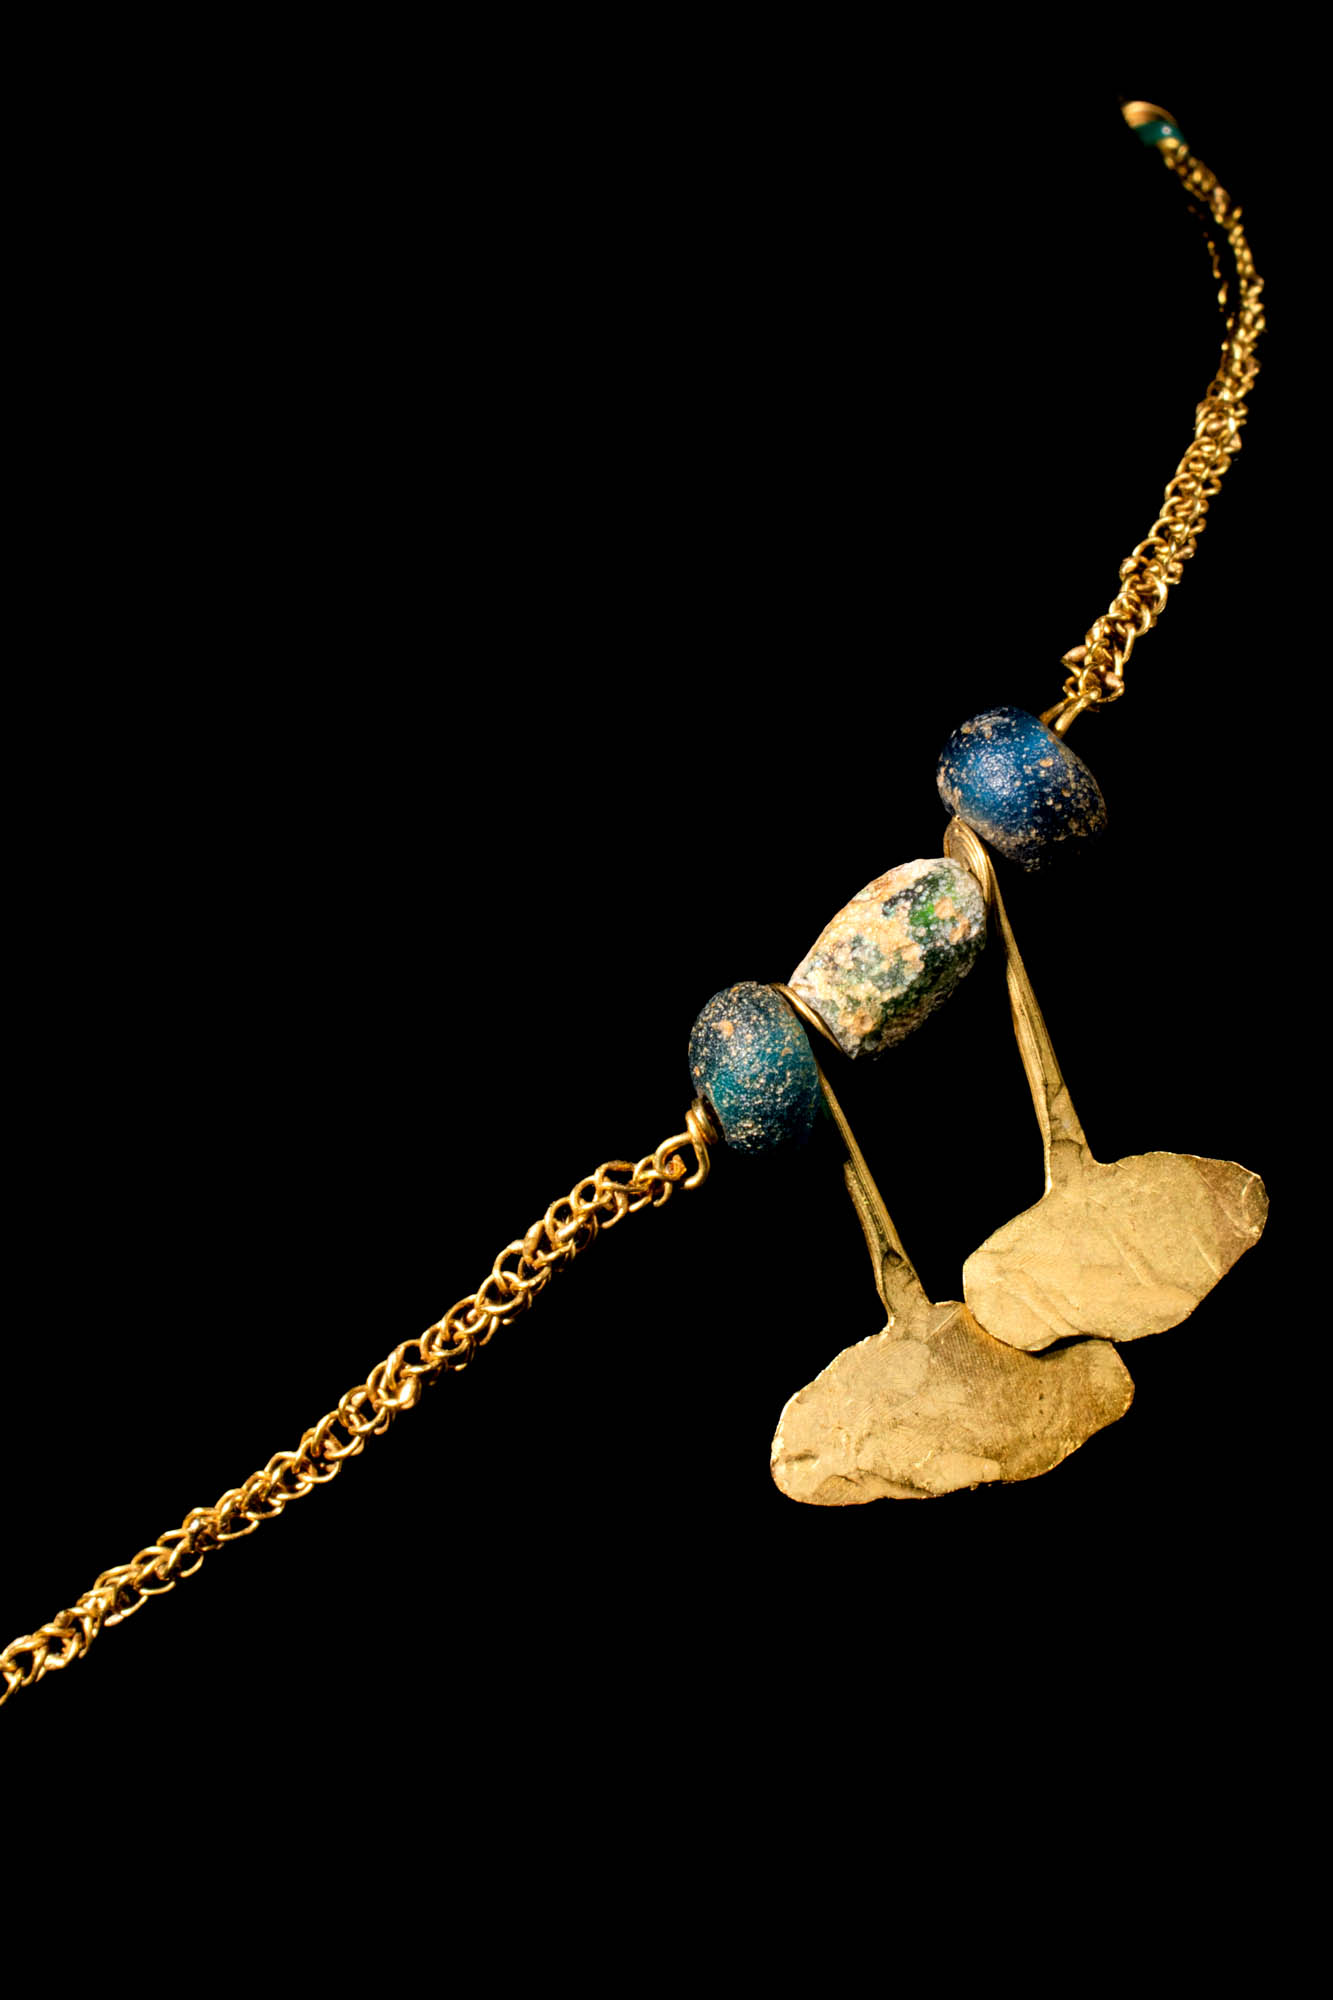 GOLD NECKLACE WITH EGYPTIAN GOLD PENDANTS AND BEADS - Image 7 of 8